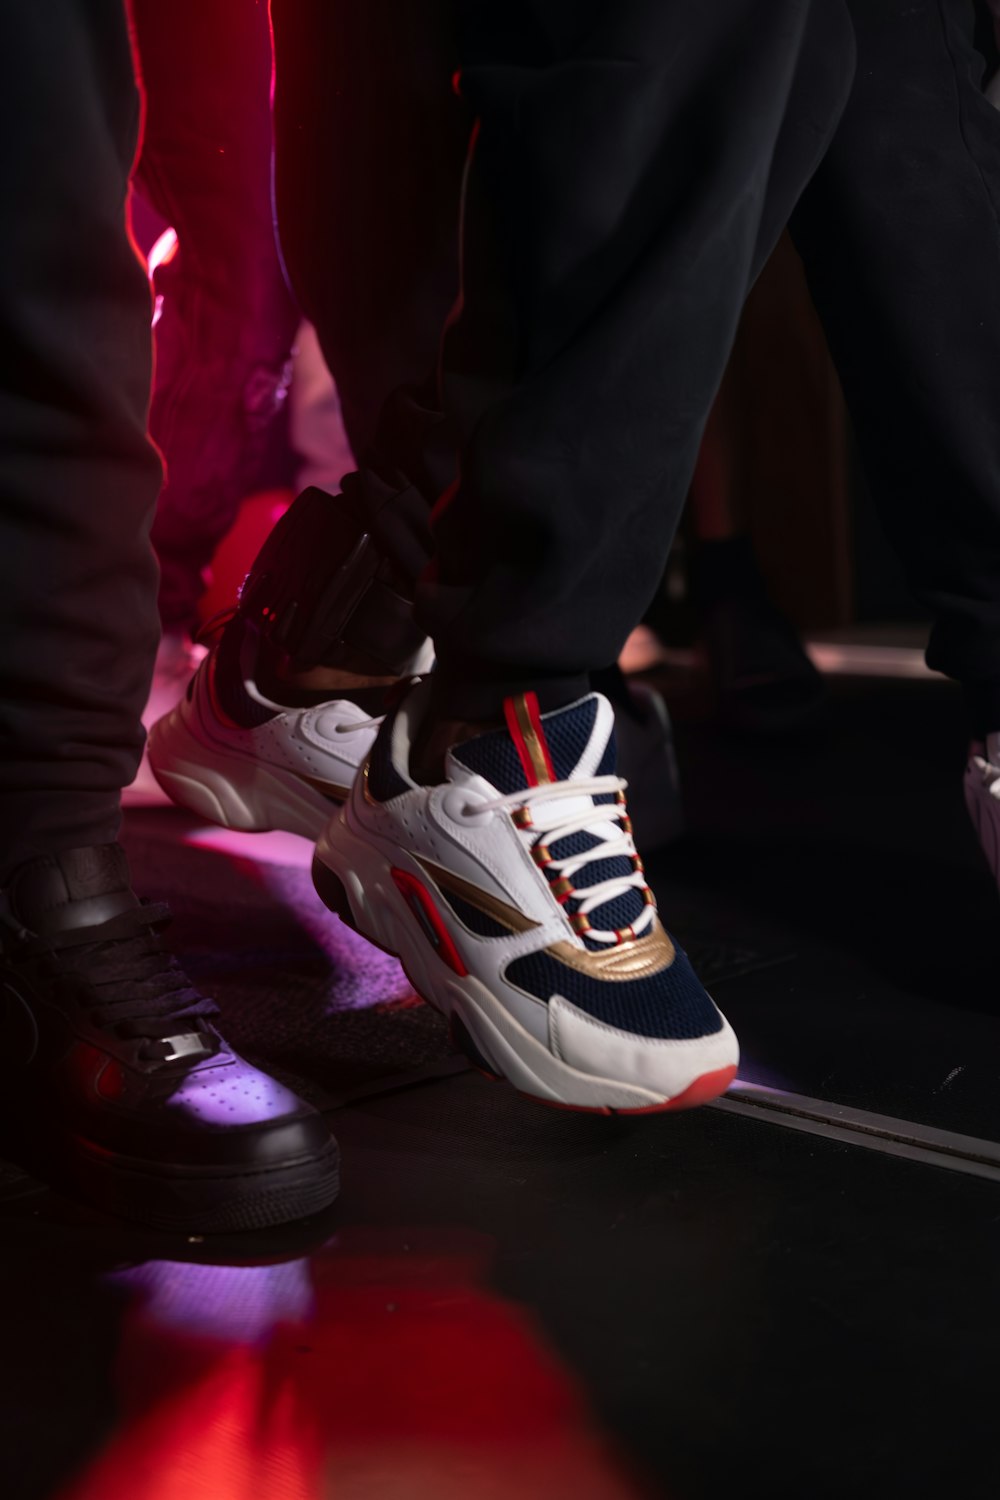 a close up of a person's shoes on a stage